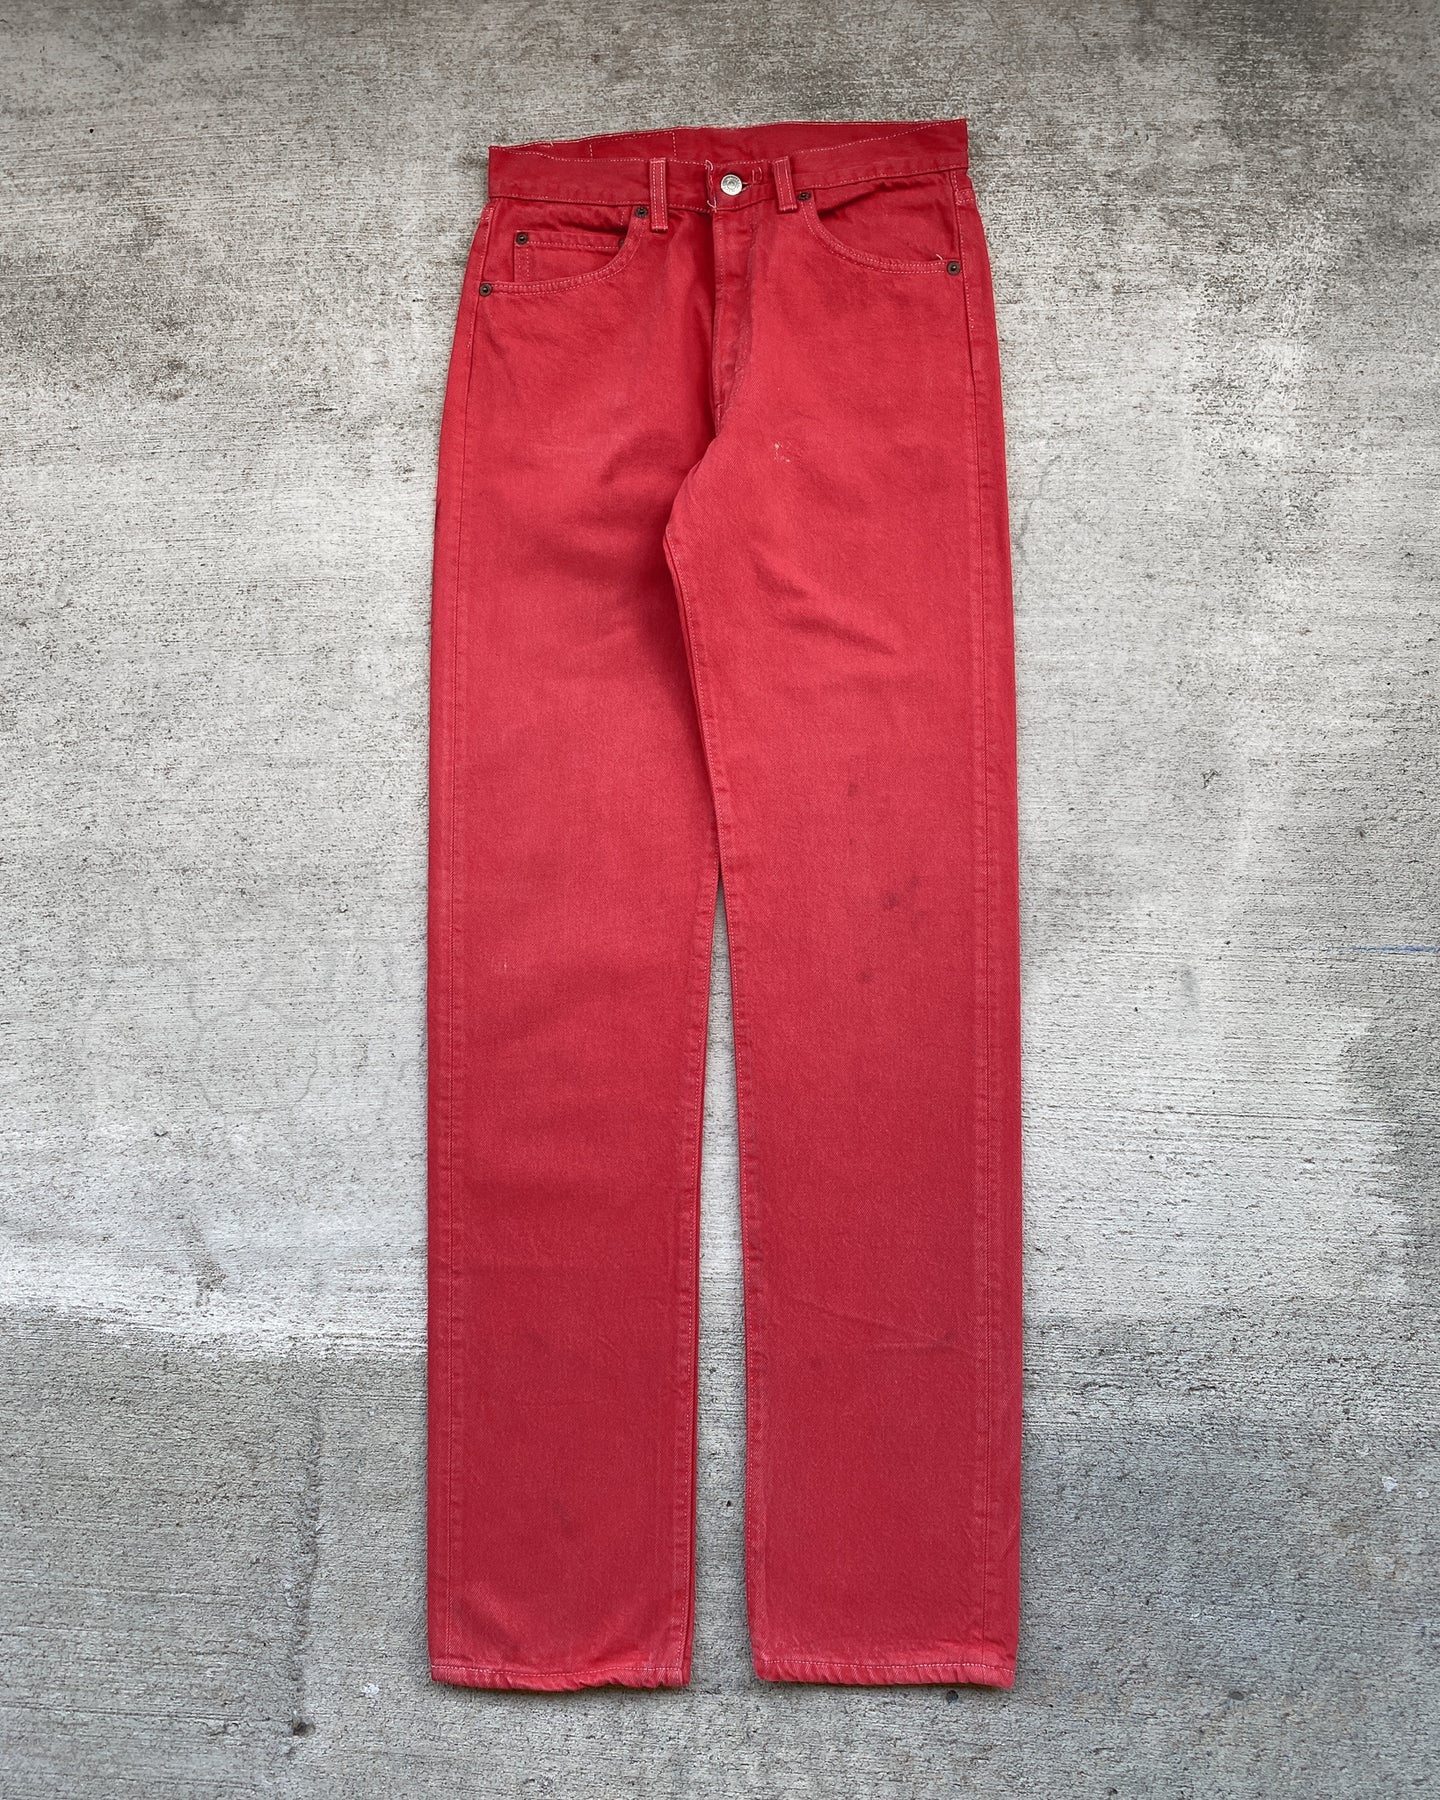 1980s Levi's Candy Red 501 - Size 30 x 36